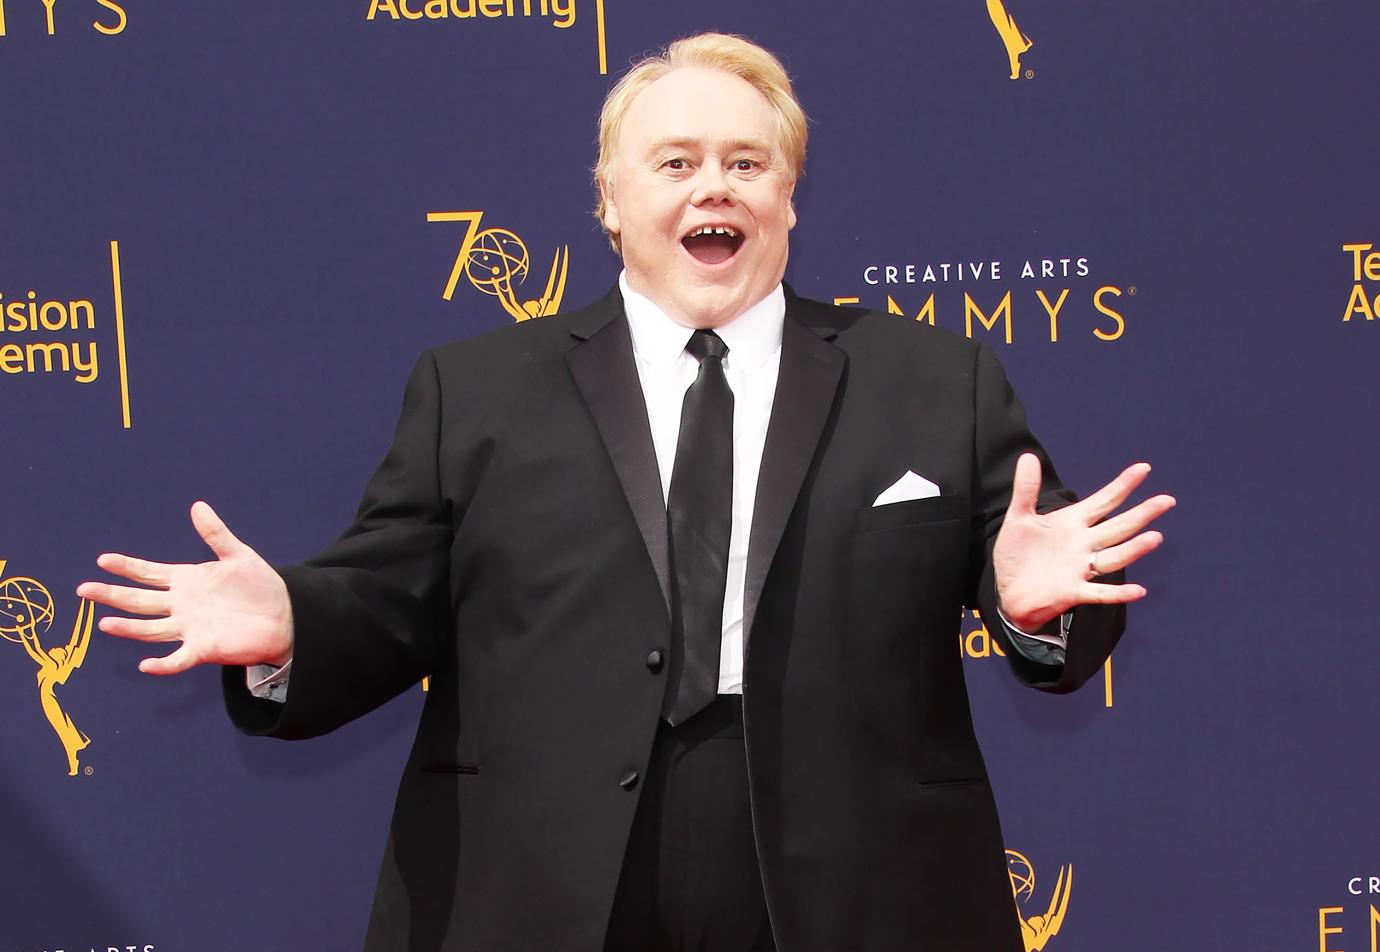 Comedian Louie Anderson Hospitalized for Blood Cancer Treatment